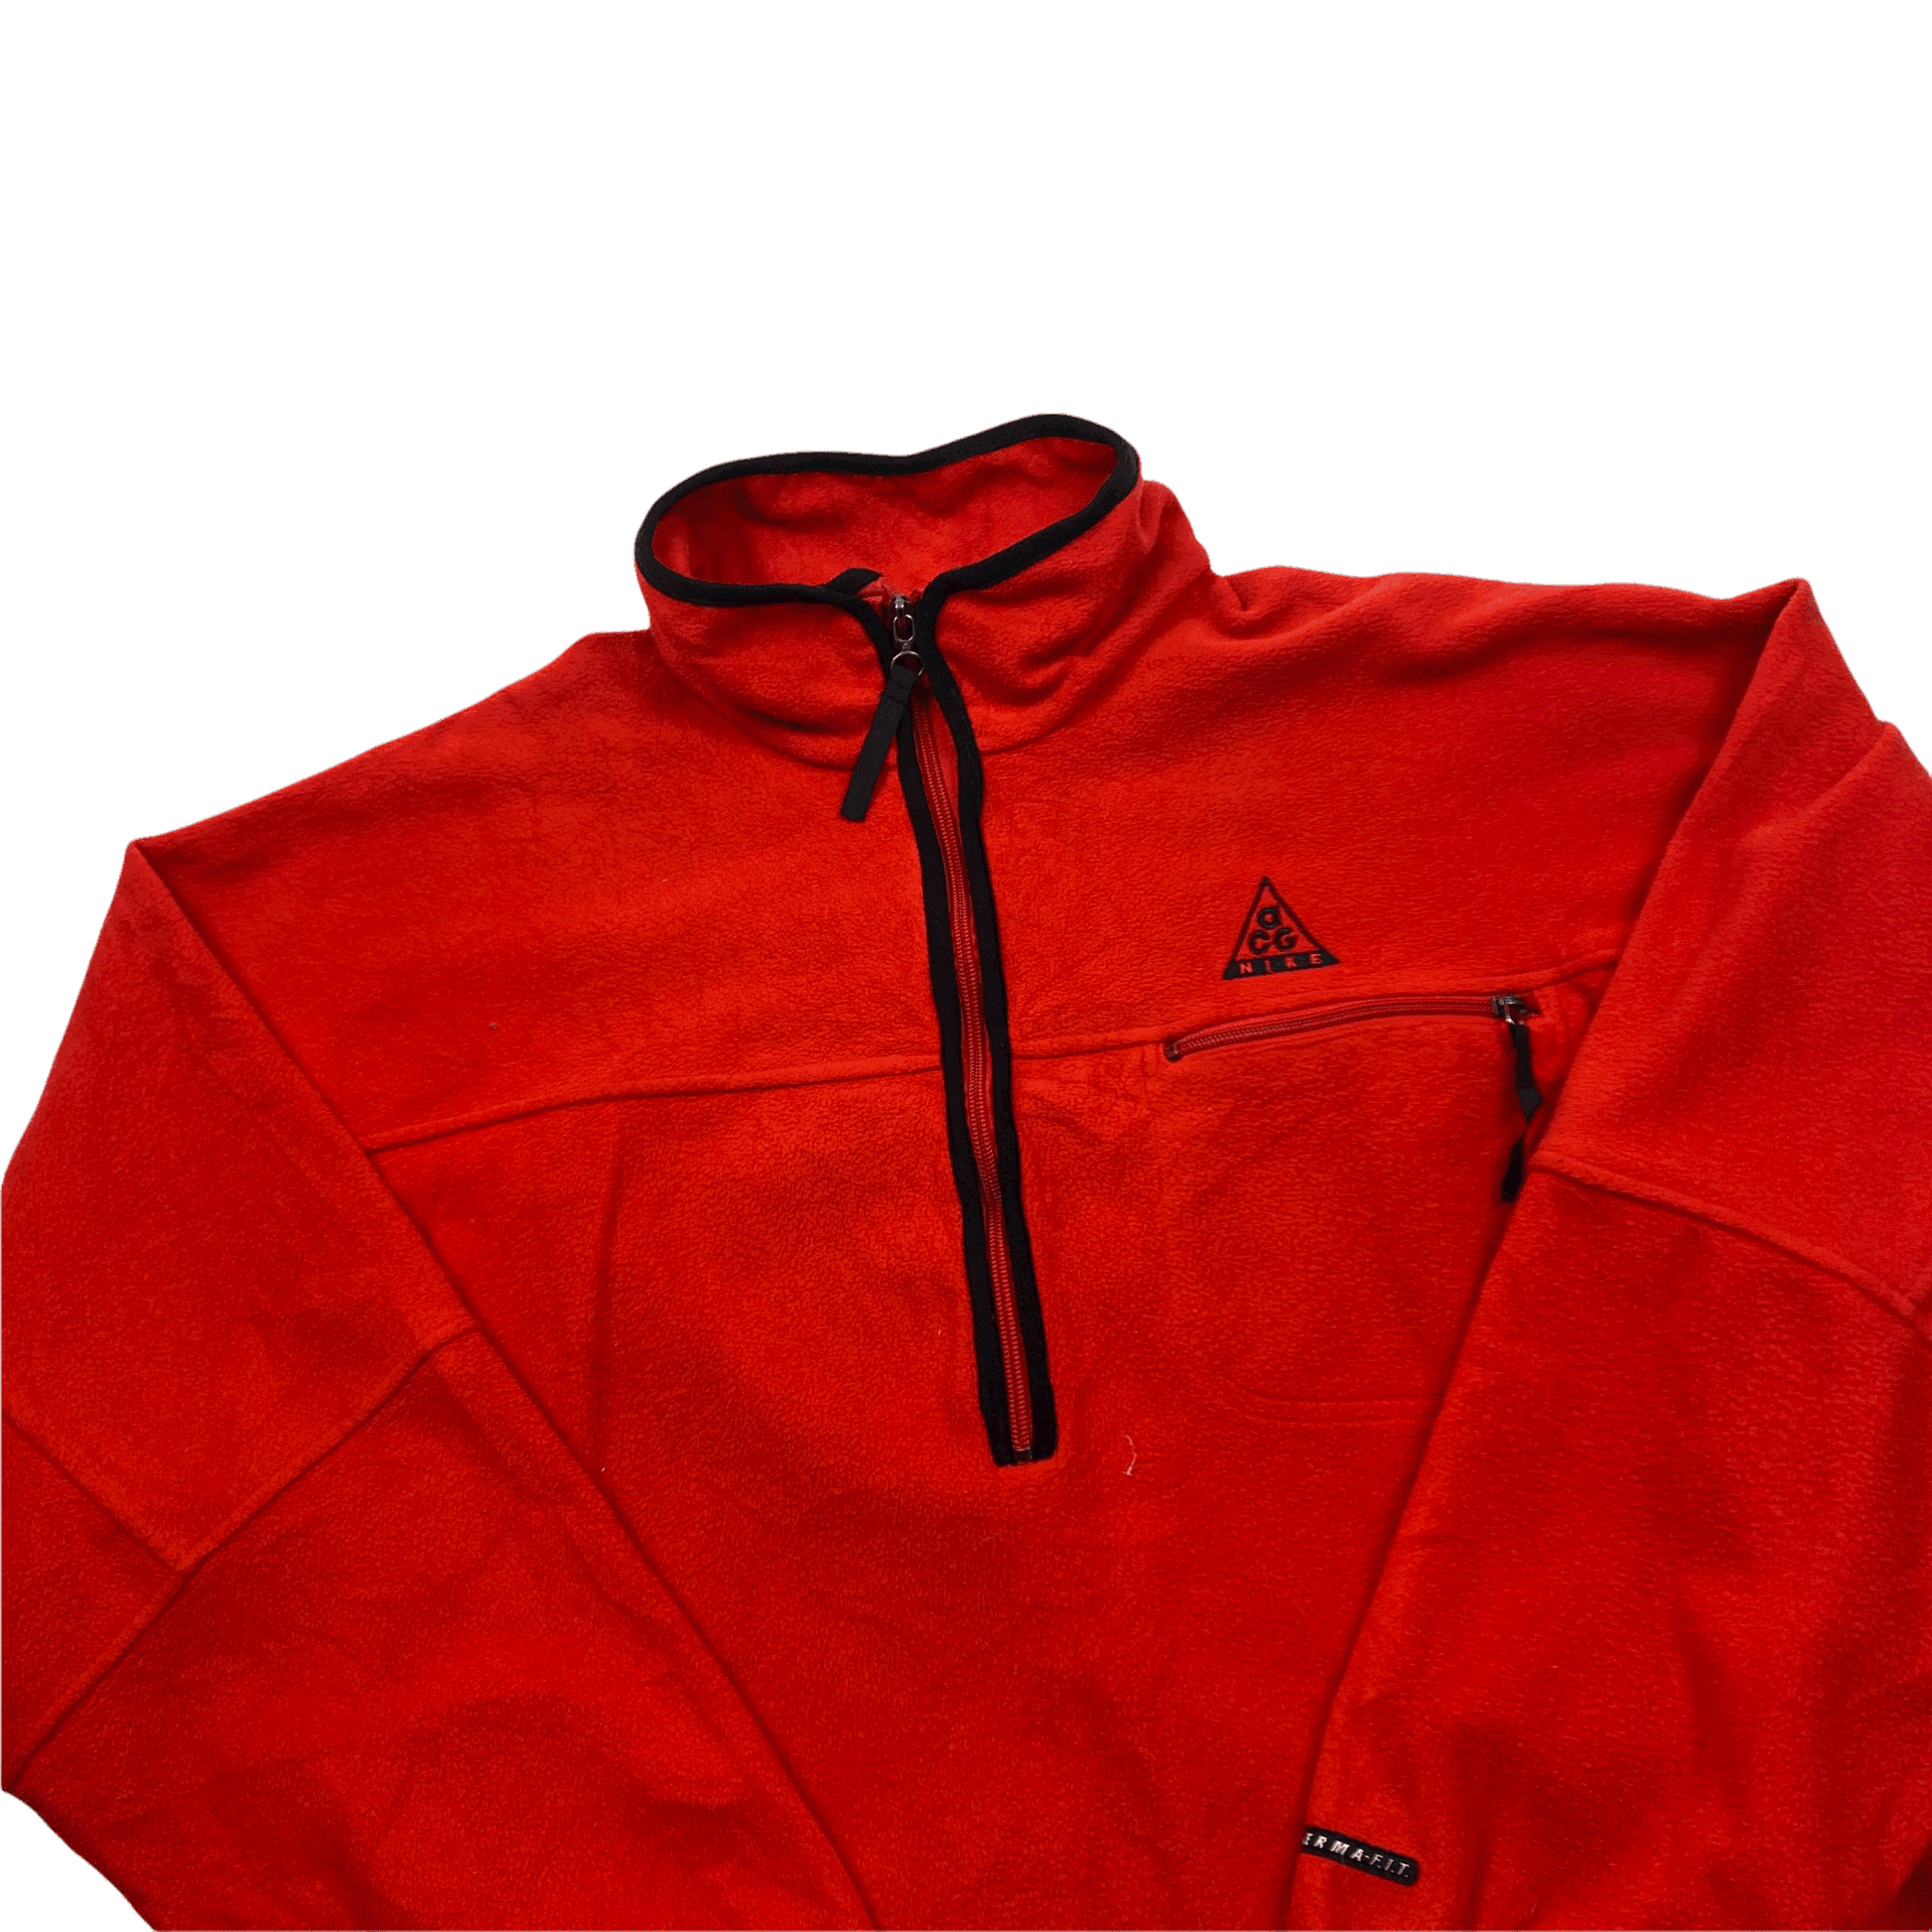 Vintage 90s Orange Nike ACG Spell-Out Quarter Zip Fleece - Large (Recommended Size - Extra Large) - The Streetwear Studio